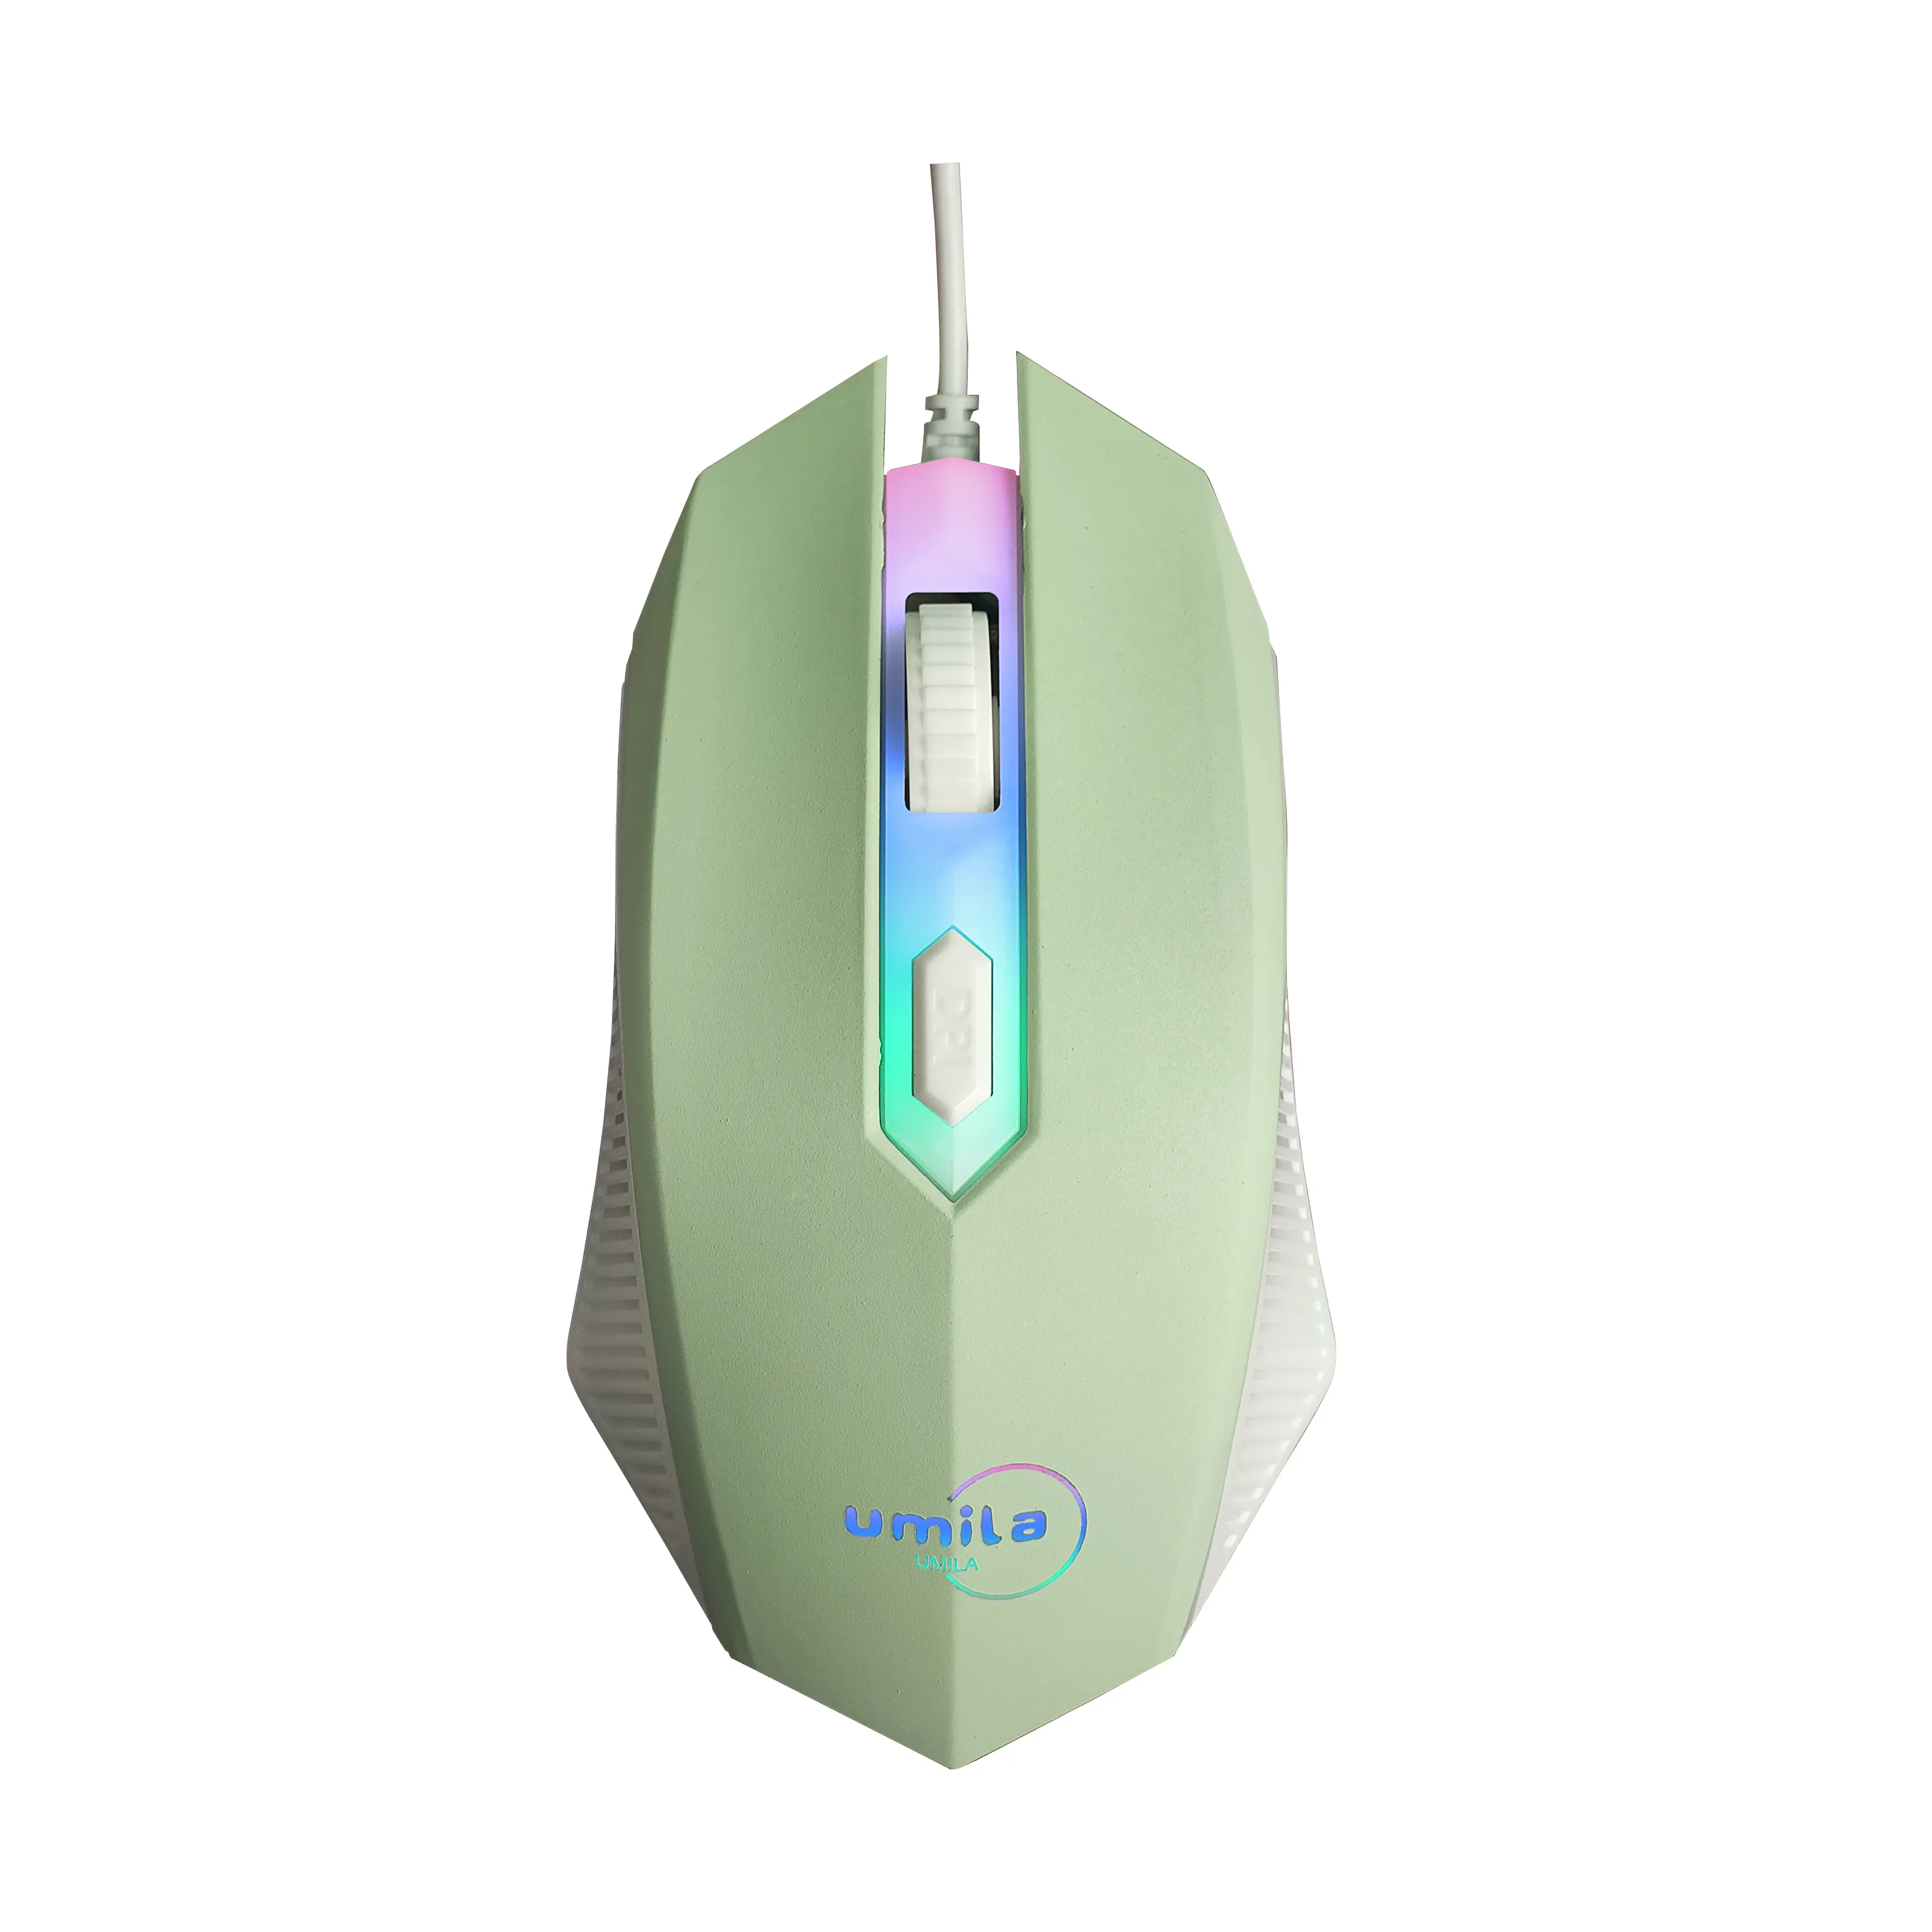 gaming mouse 2400 DPI Optical Sensor - 4 Buttons  Ergonomic Design Computer Mouse for Windows PC Gamers